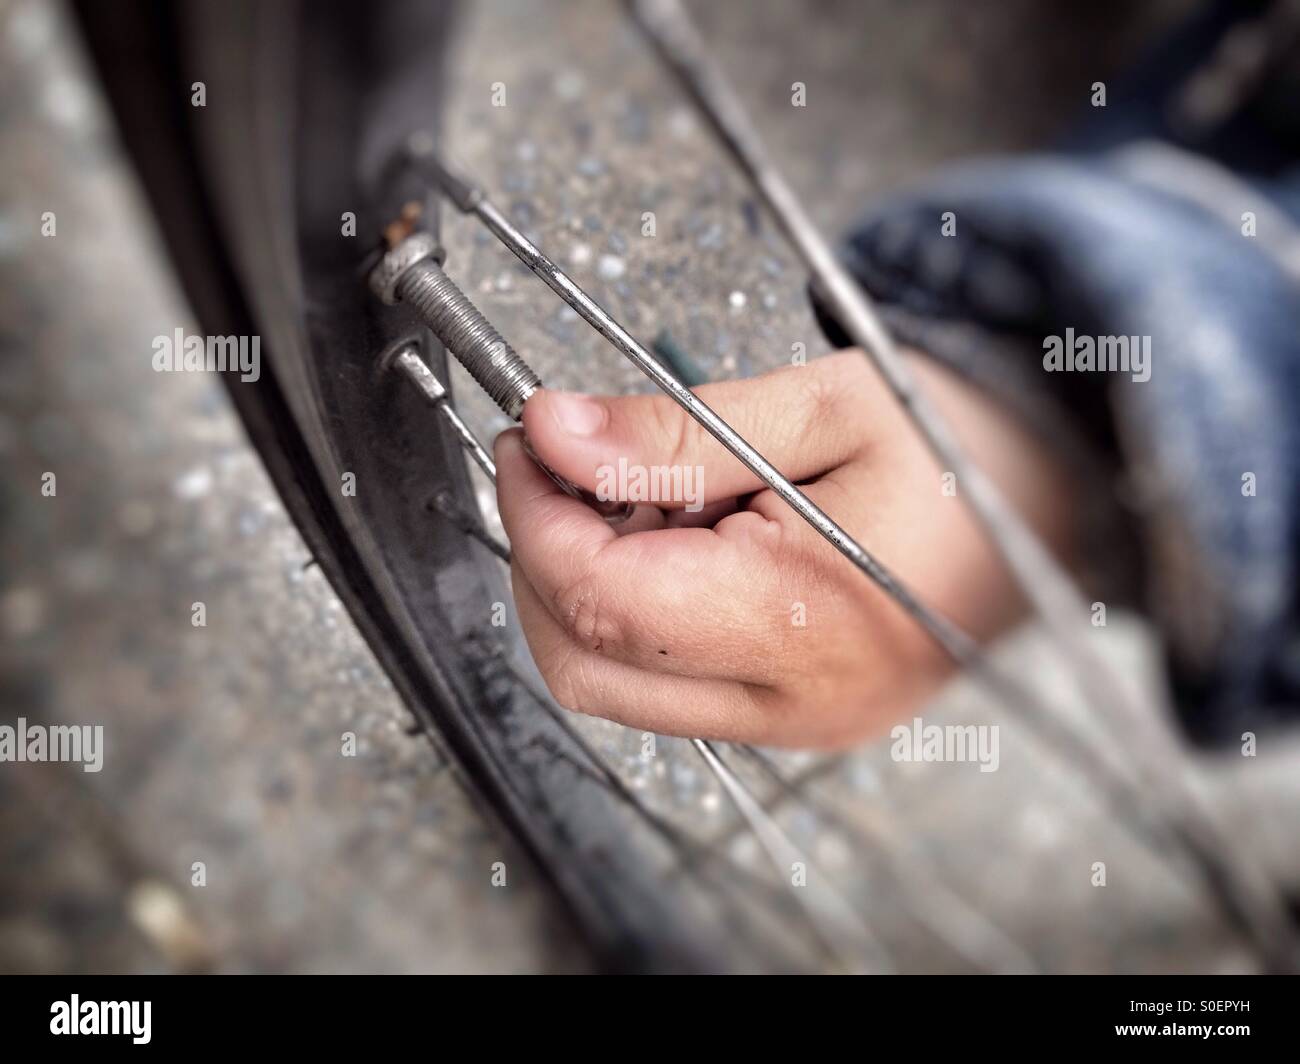 A toddler's hand removing the cap of the valve on a Bicycle Wheel Stock Photo